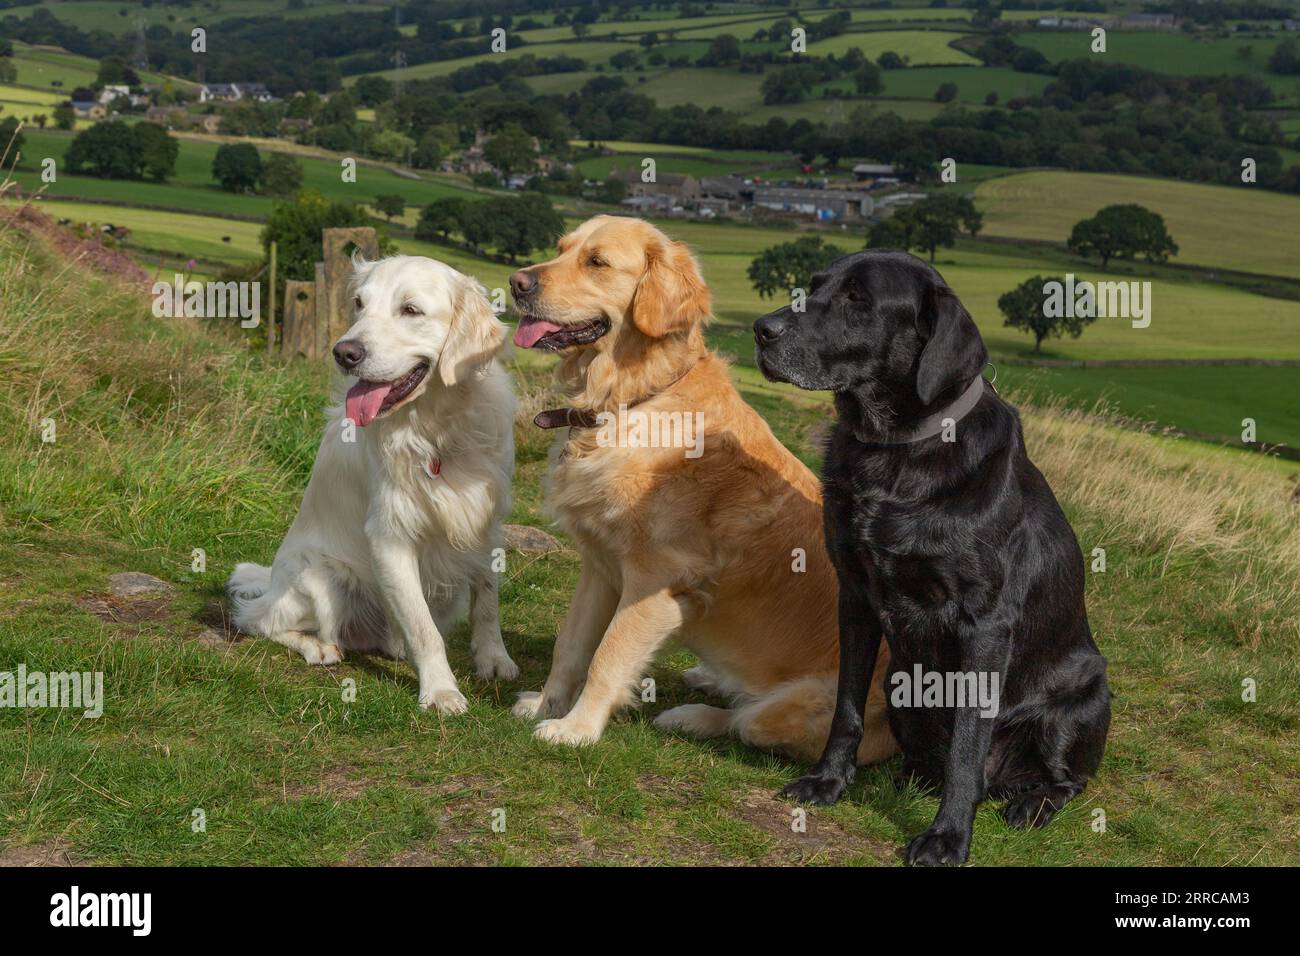 A black labrador retriever and two golden retrievers (gundogs) sitting in Yorkshire countryside. Stock Photo